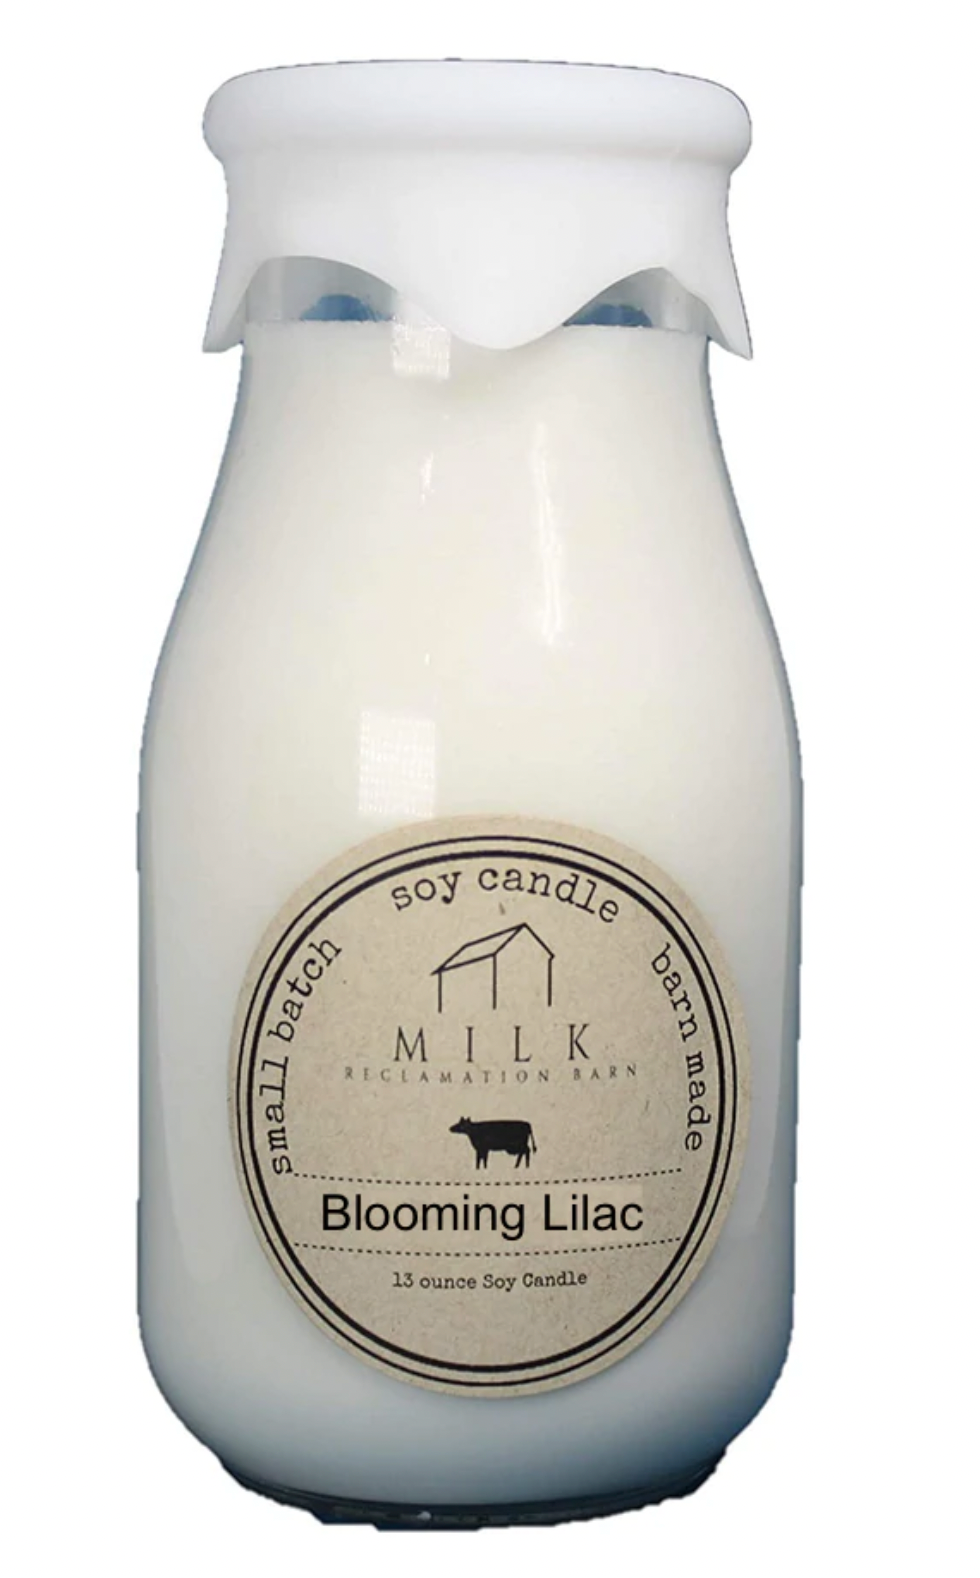 Milk Barn - Blooming Lilac Soy Candle